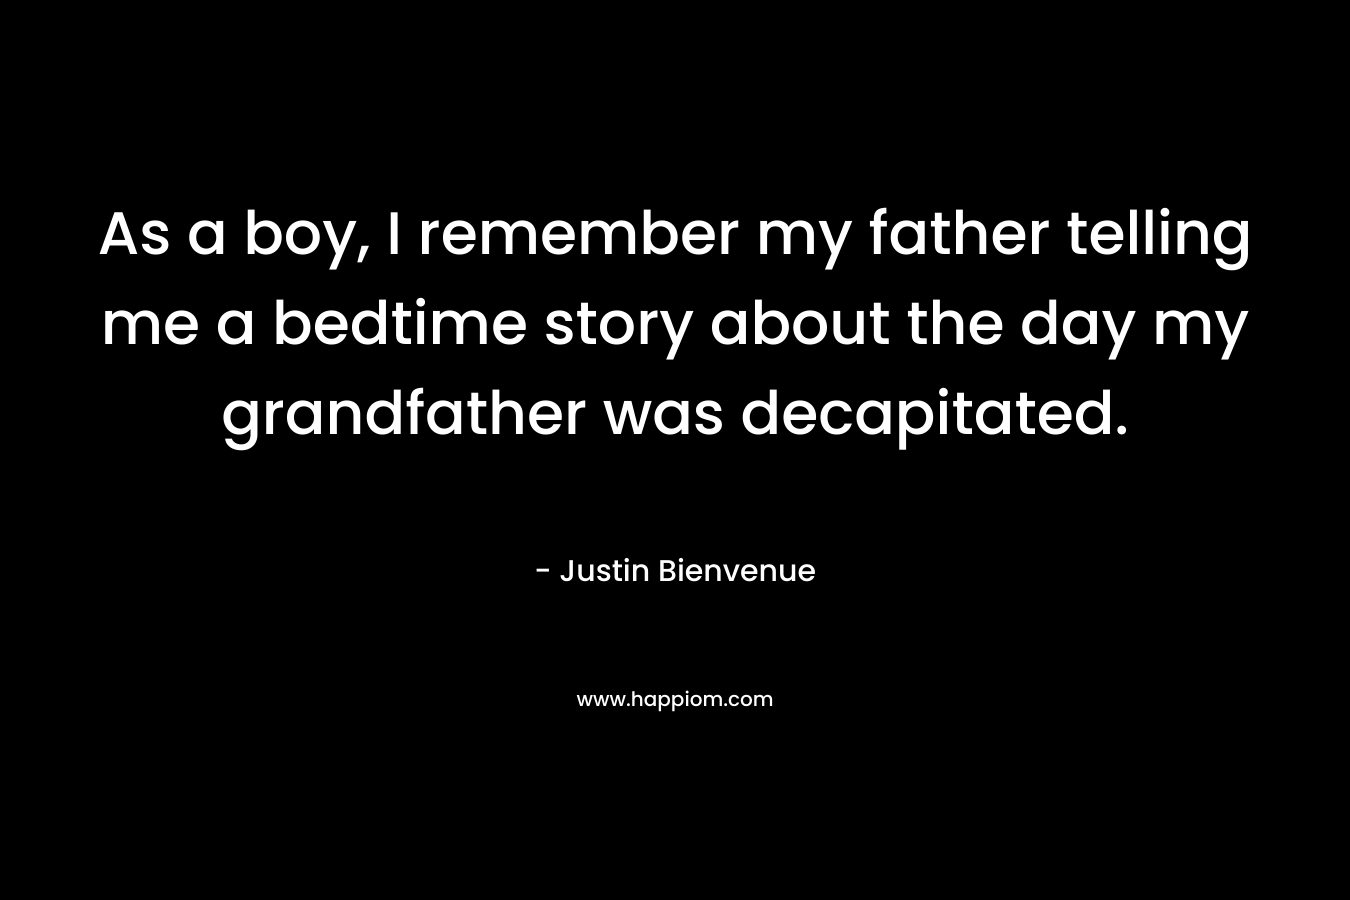 As a boy, I remember my father telling me a bedtime story about the day my grandfather was decapitated. – Justin Bienvenue